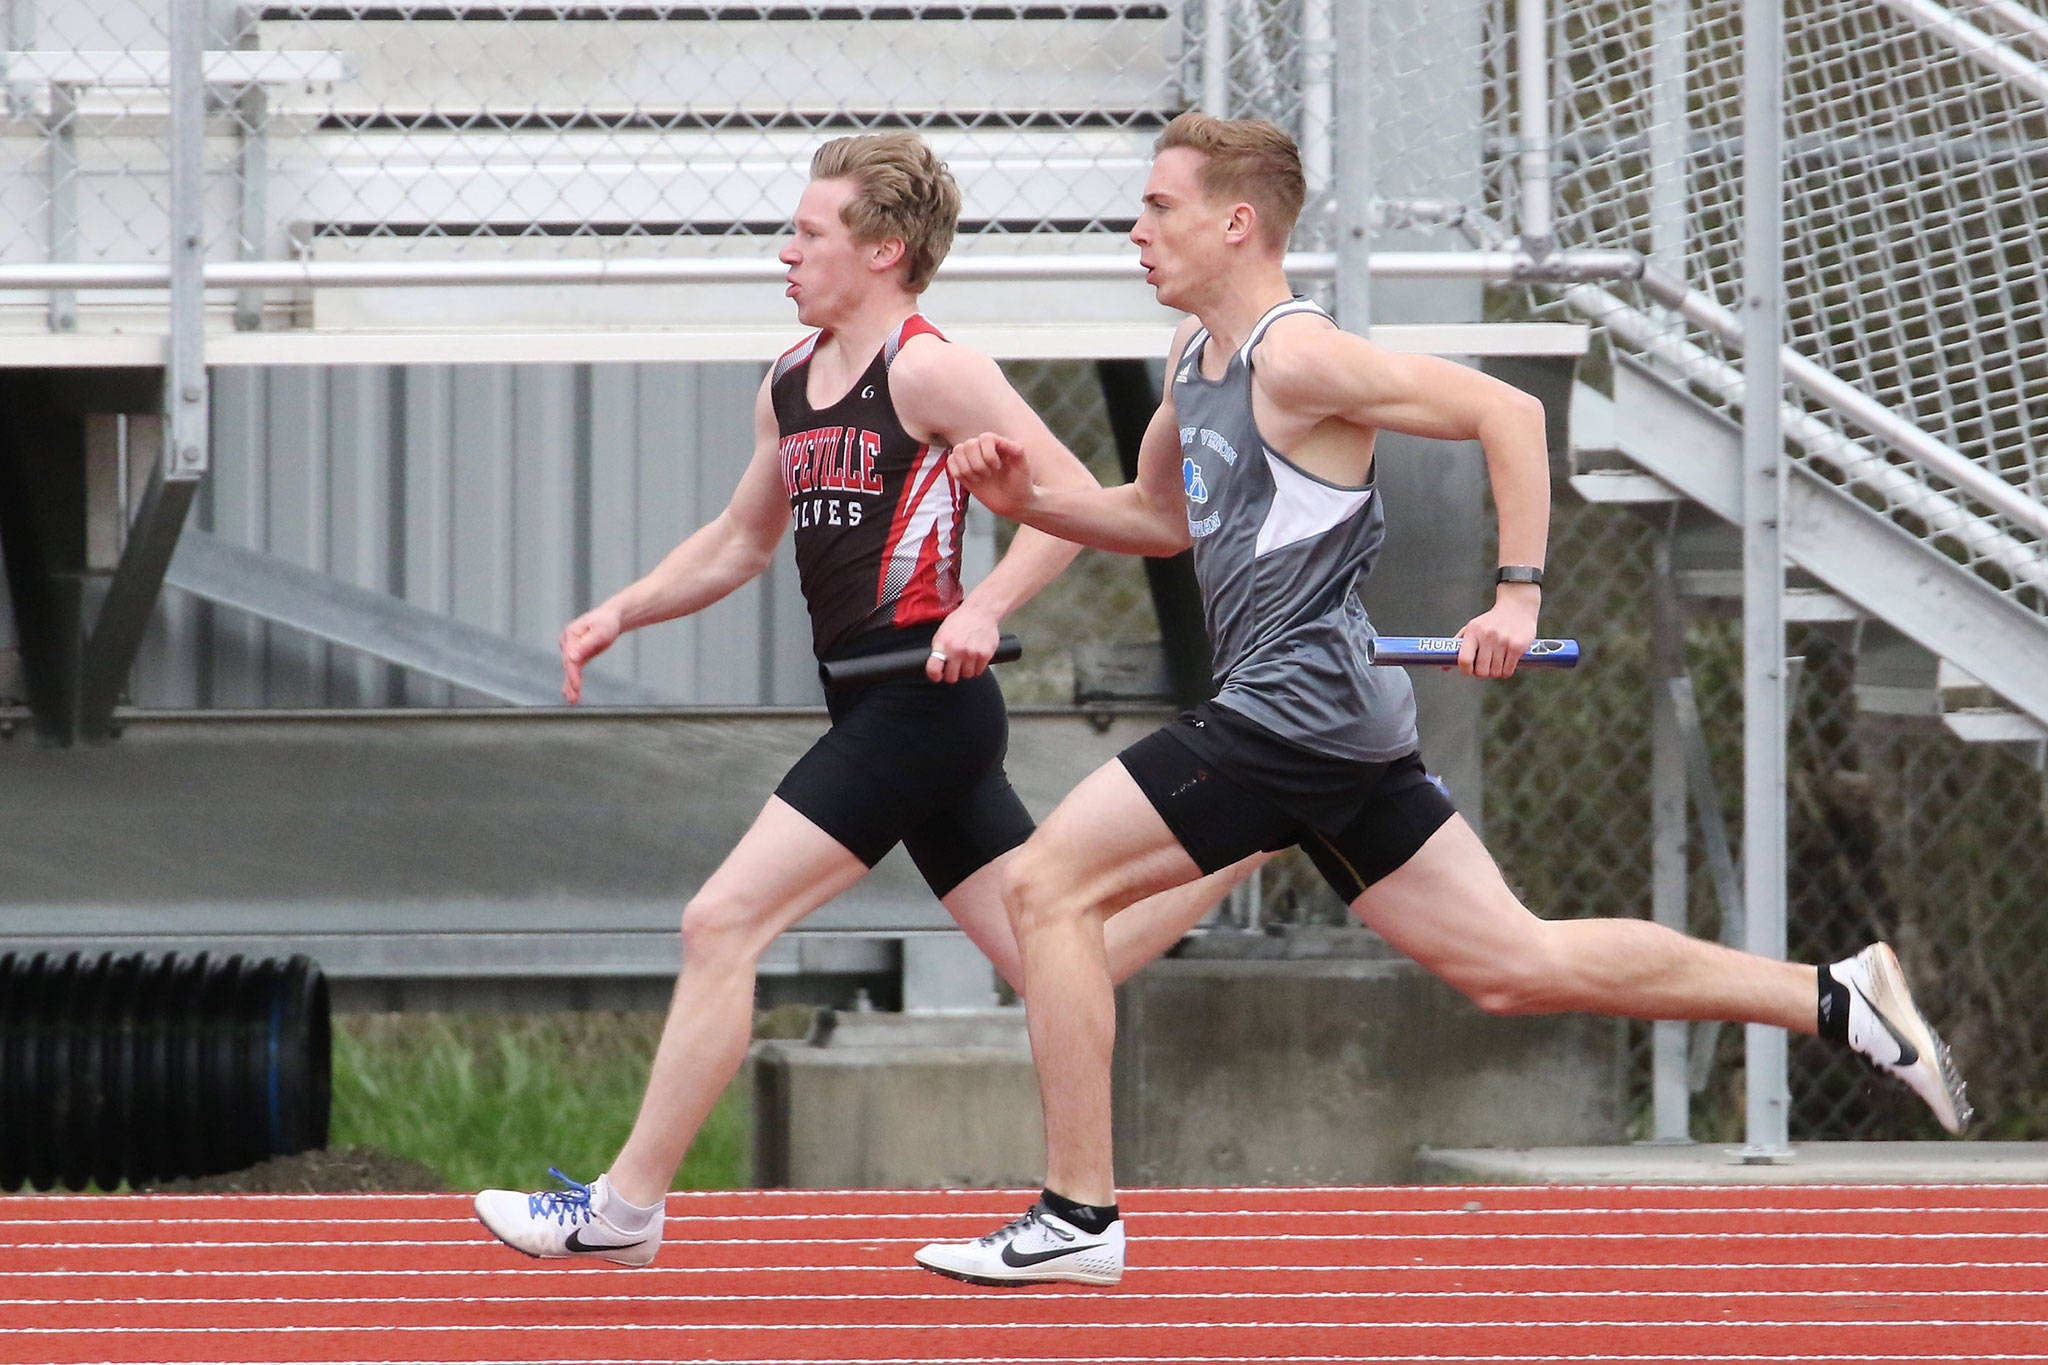 Coupeville’s Jacob Smith, left, races to the finish line in the 4x100 relay Wednesday.(Photo by John Fisken)